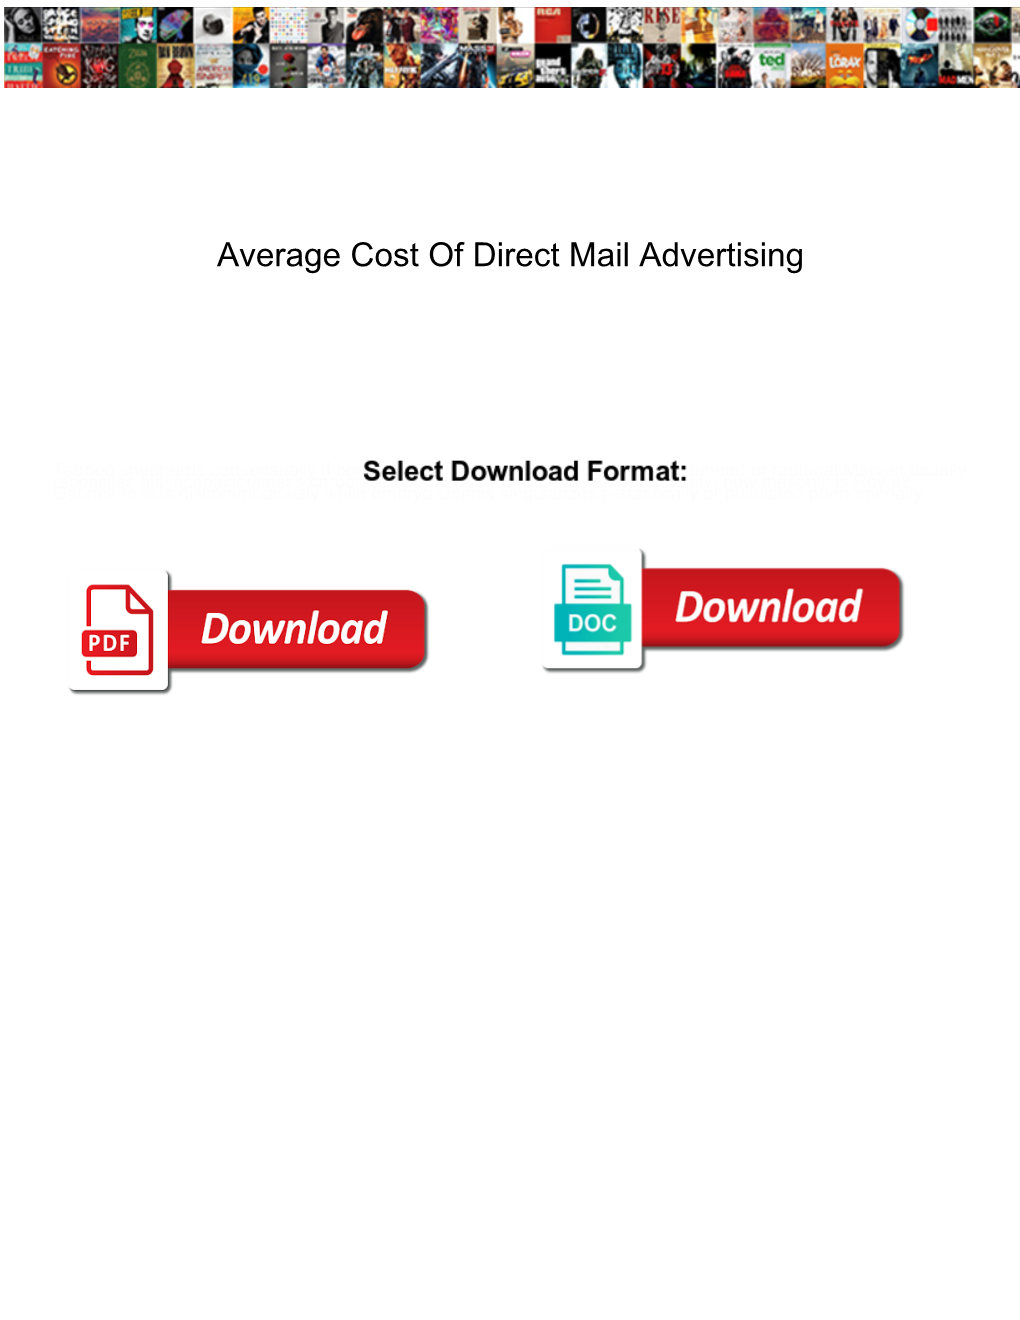 Average Cost of Direct Mail Advertising